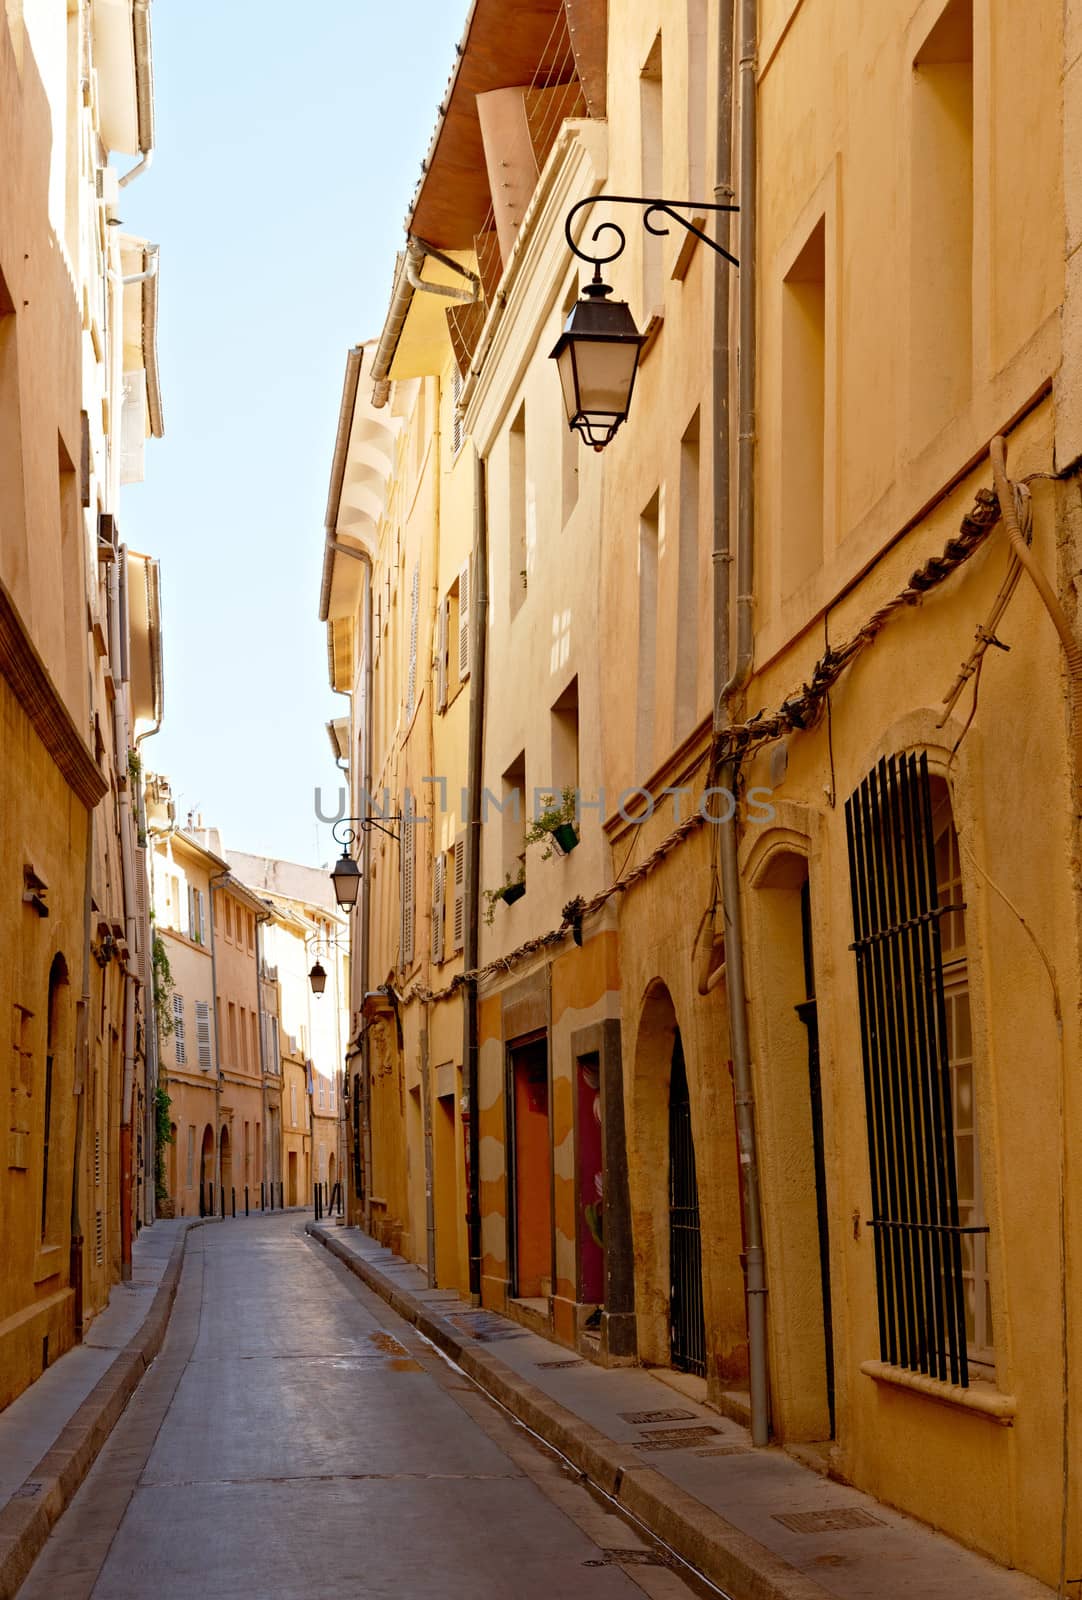 Narrow street with typical houses in Aix en Provence, France